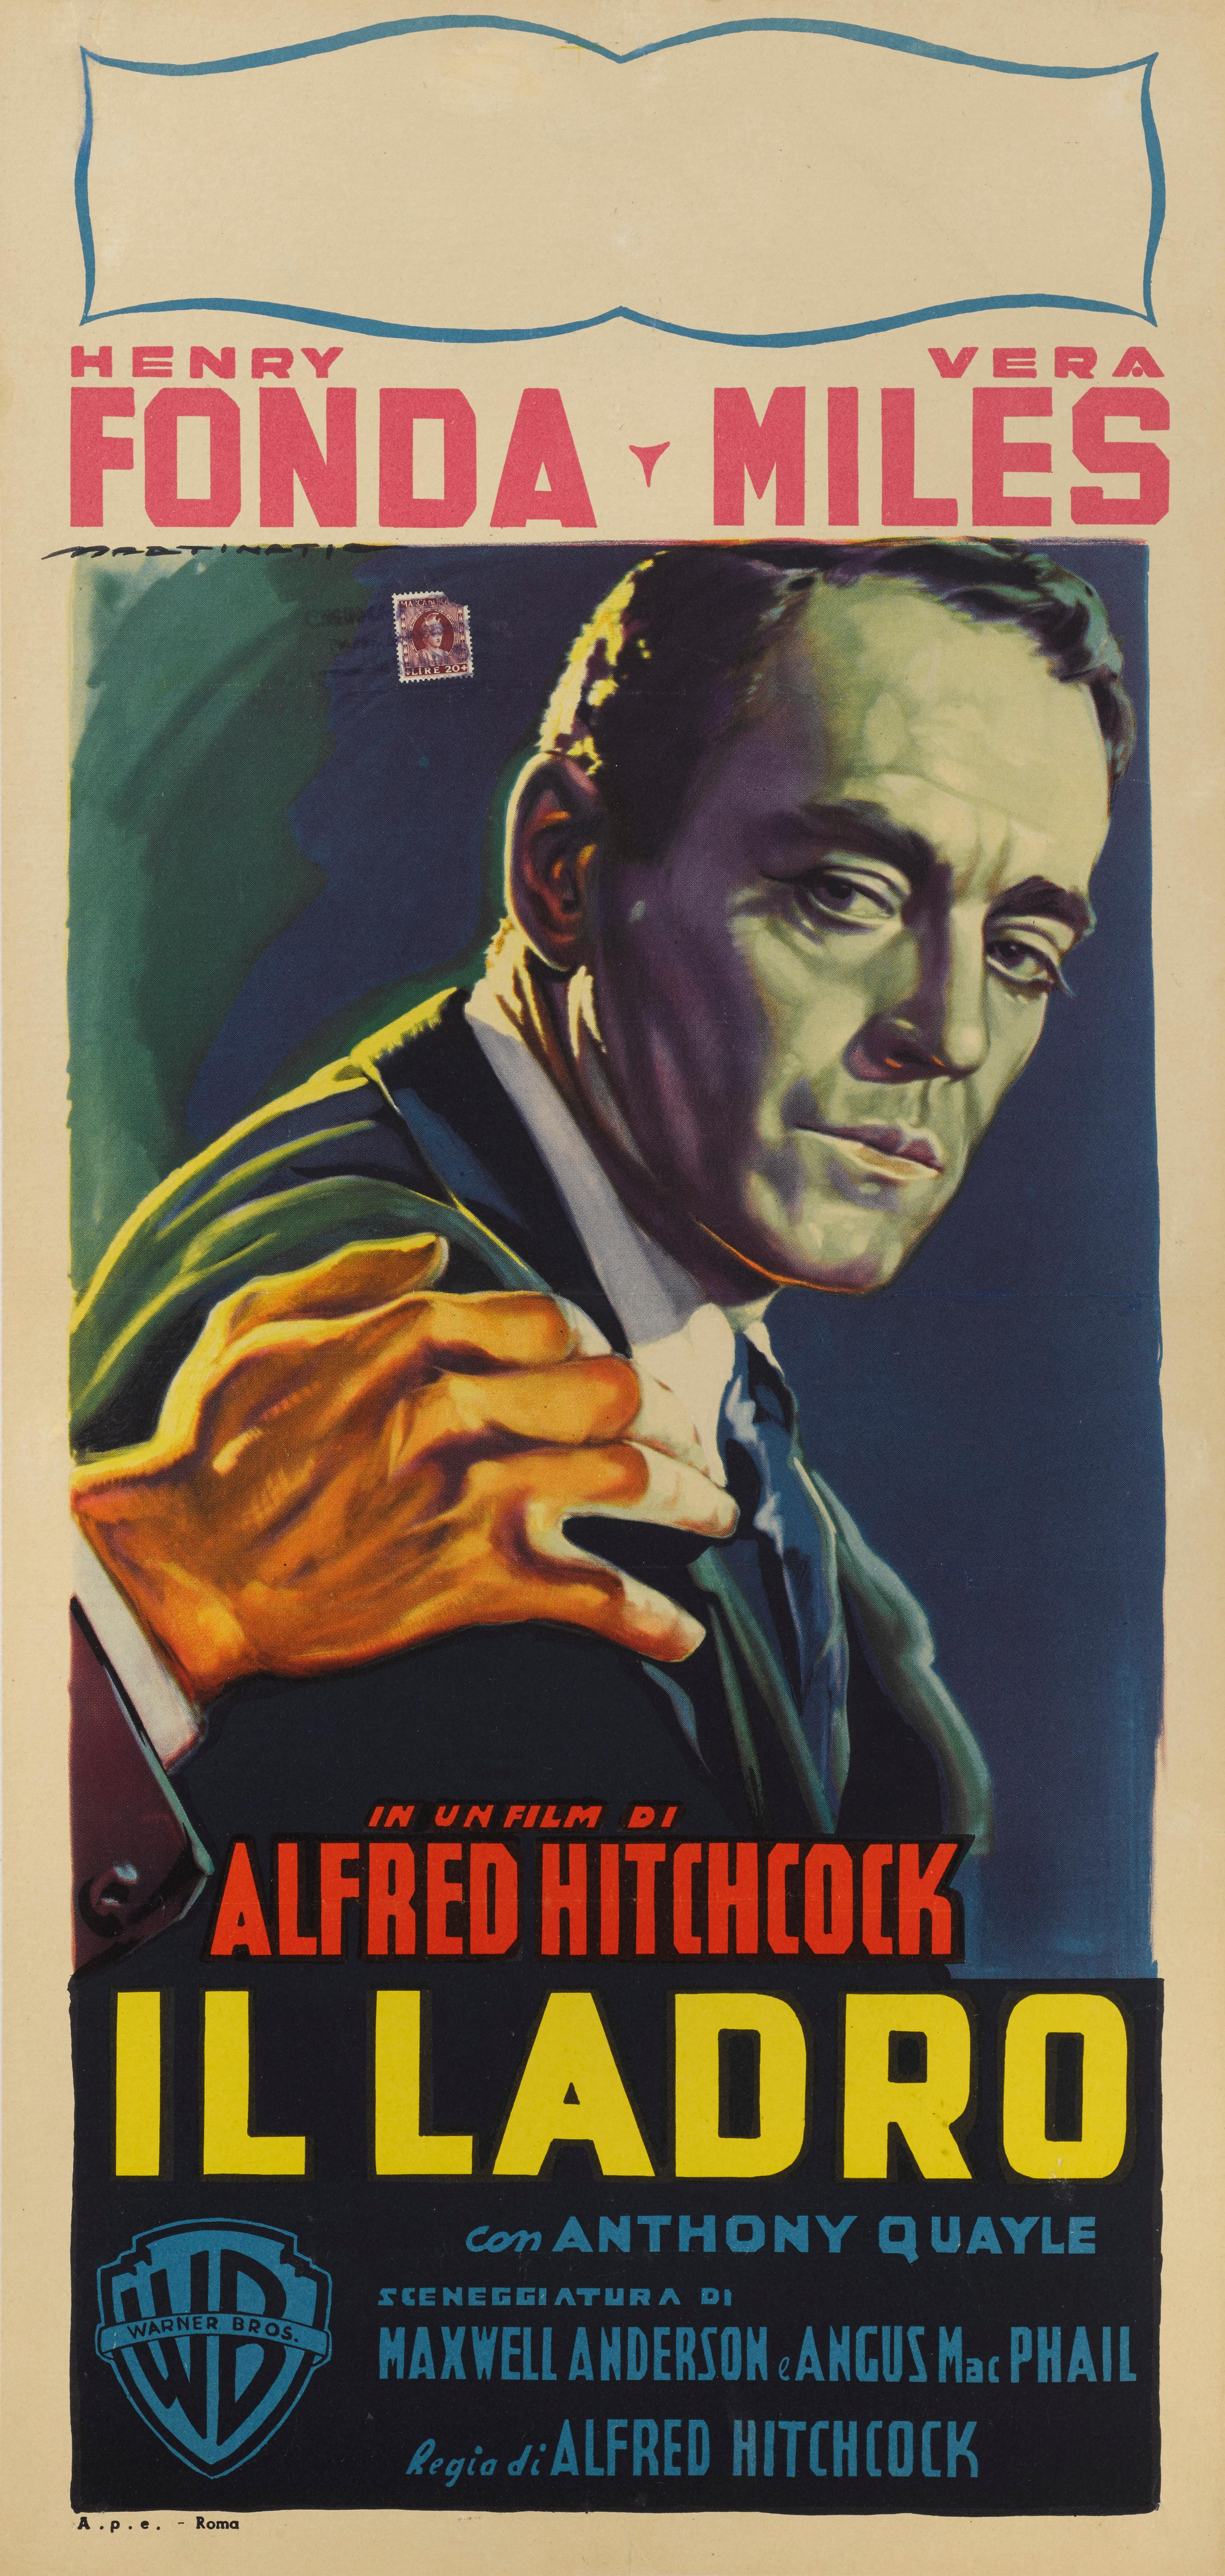 Original Italian film poster for Alfred Hitchcock's ‘The Wrong Man’, 1956.
This poster was created by Luigi Martinati (1893-1984) for the film's first Italian release in 1957.
This Hitchcock drama stars Henry Fonda and Vera Miles, and is based on